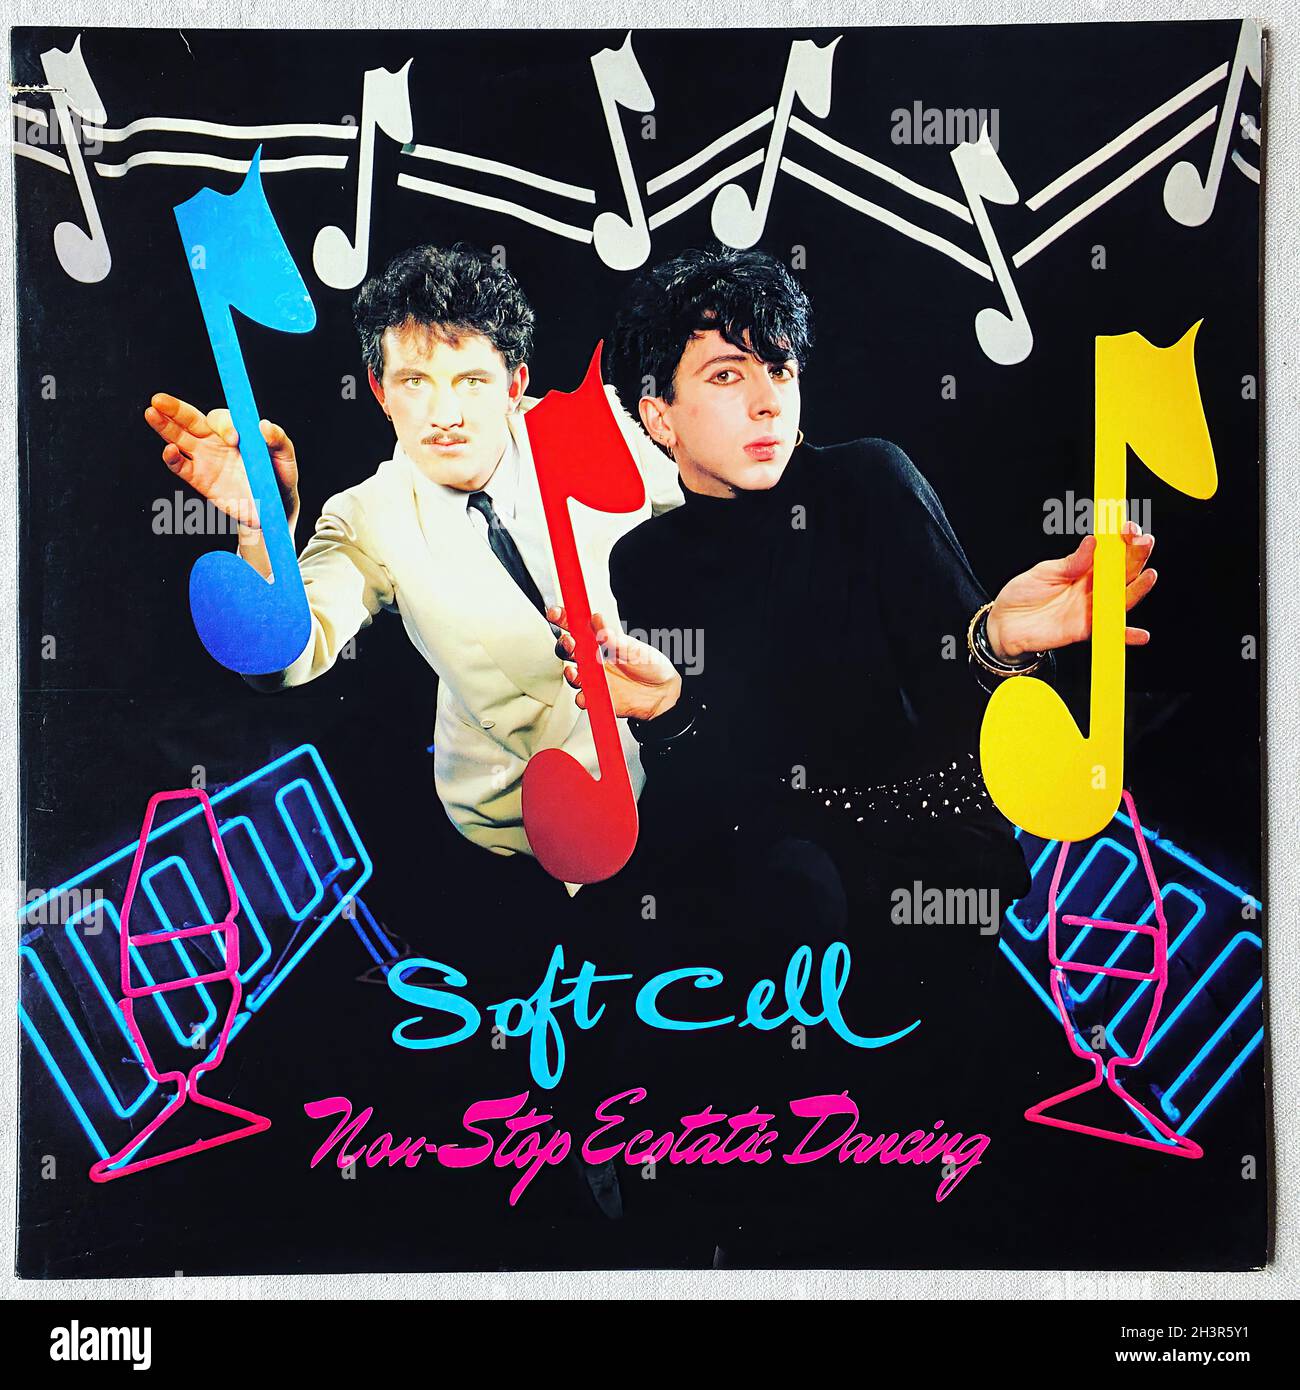 Soft Cell - Non Stop Ecstatic Dancing (1982) Stock Photo